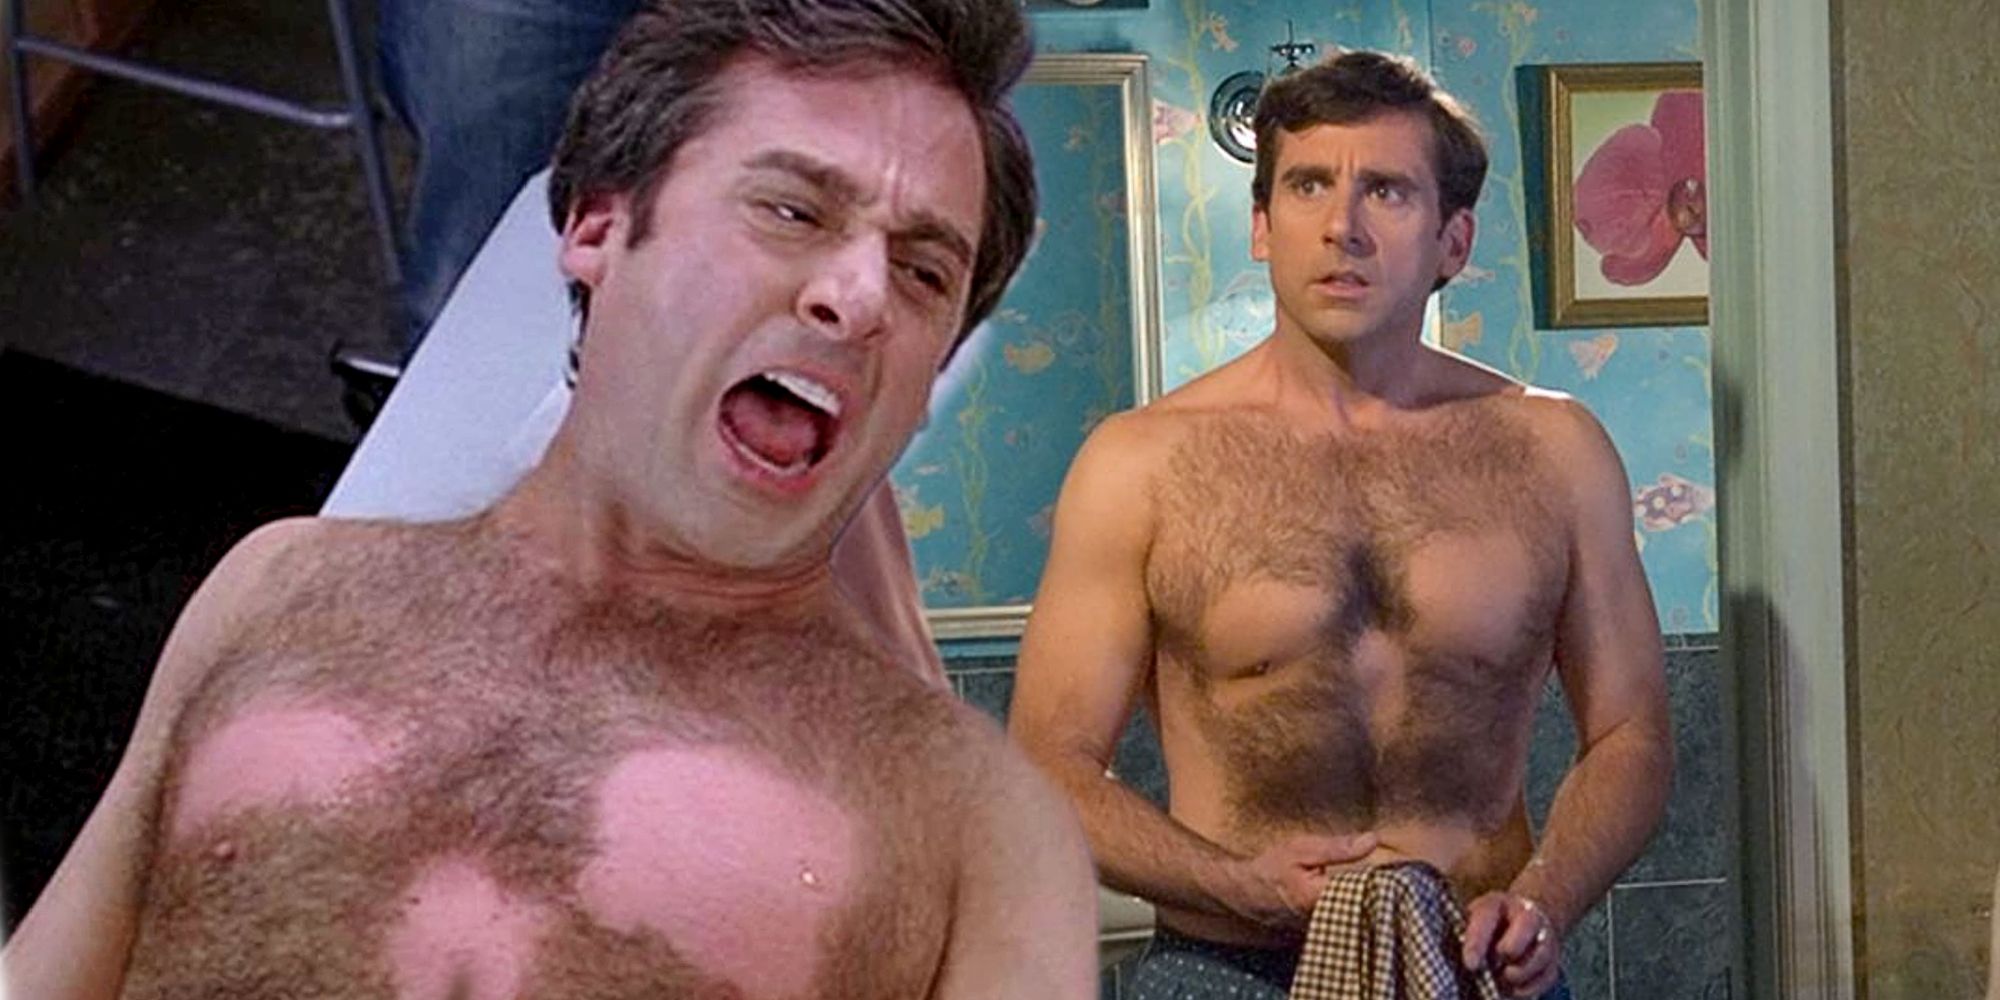 Steve Carrell Gets Waxed in The 40 Year Old Virgin